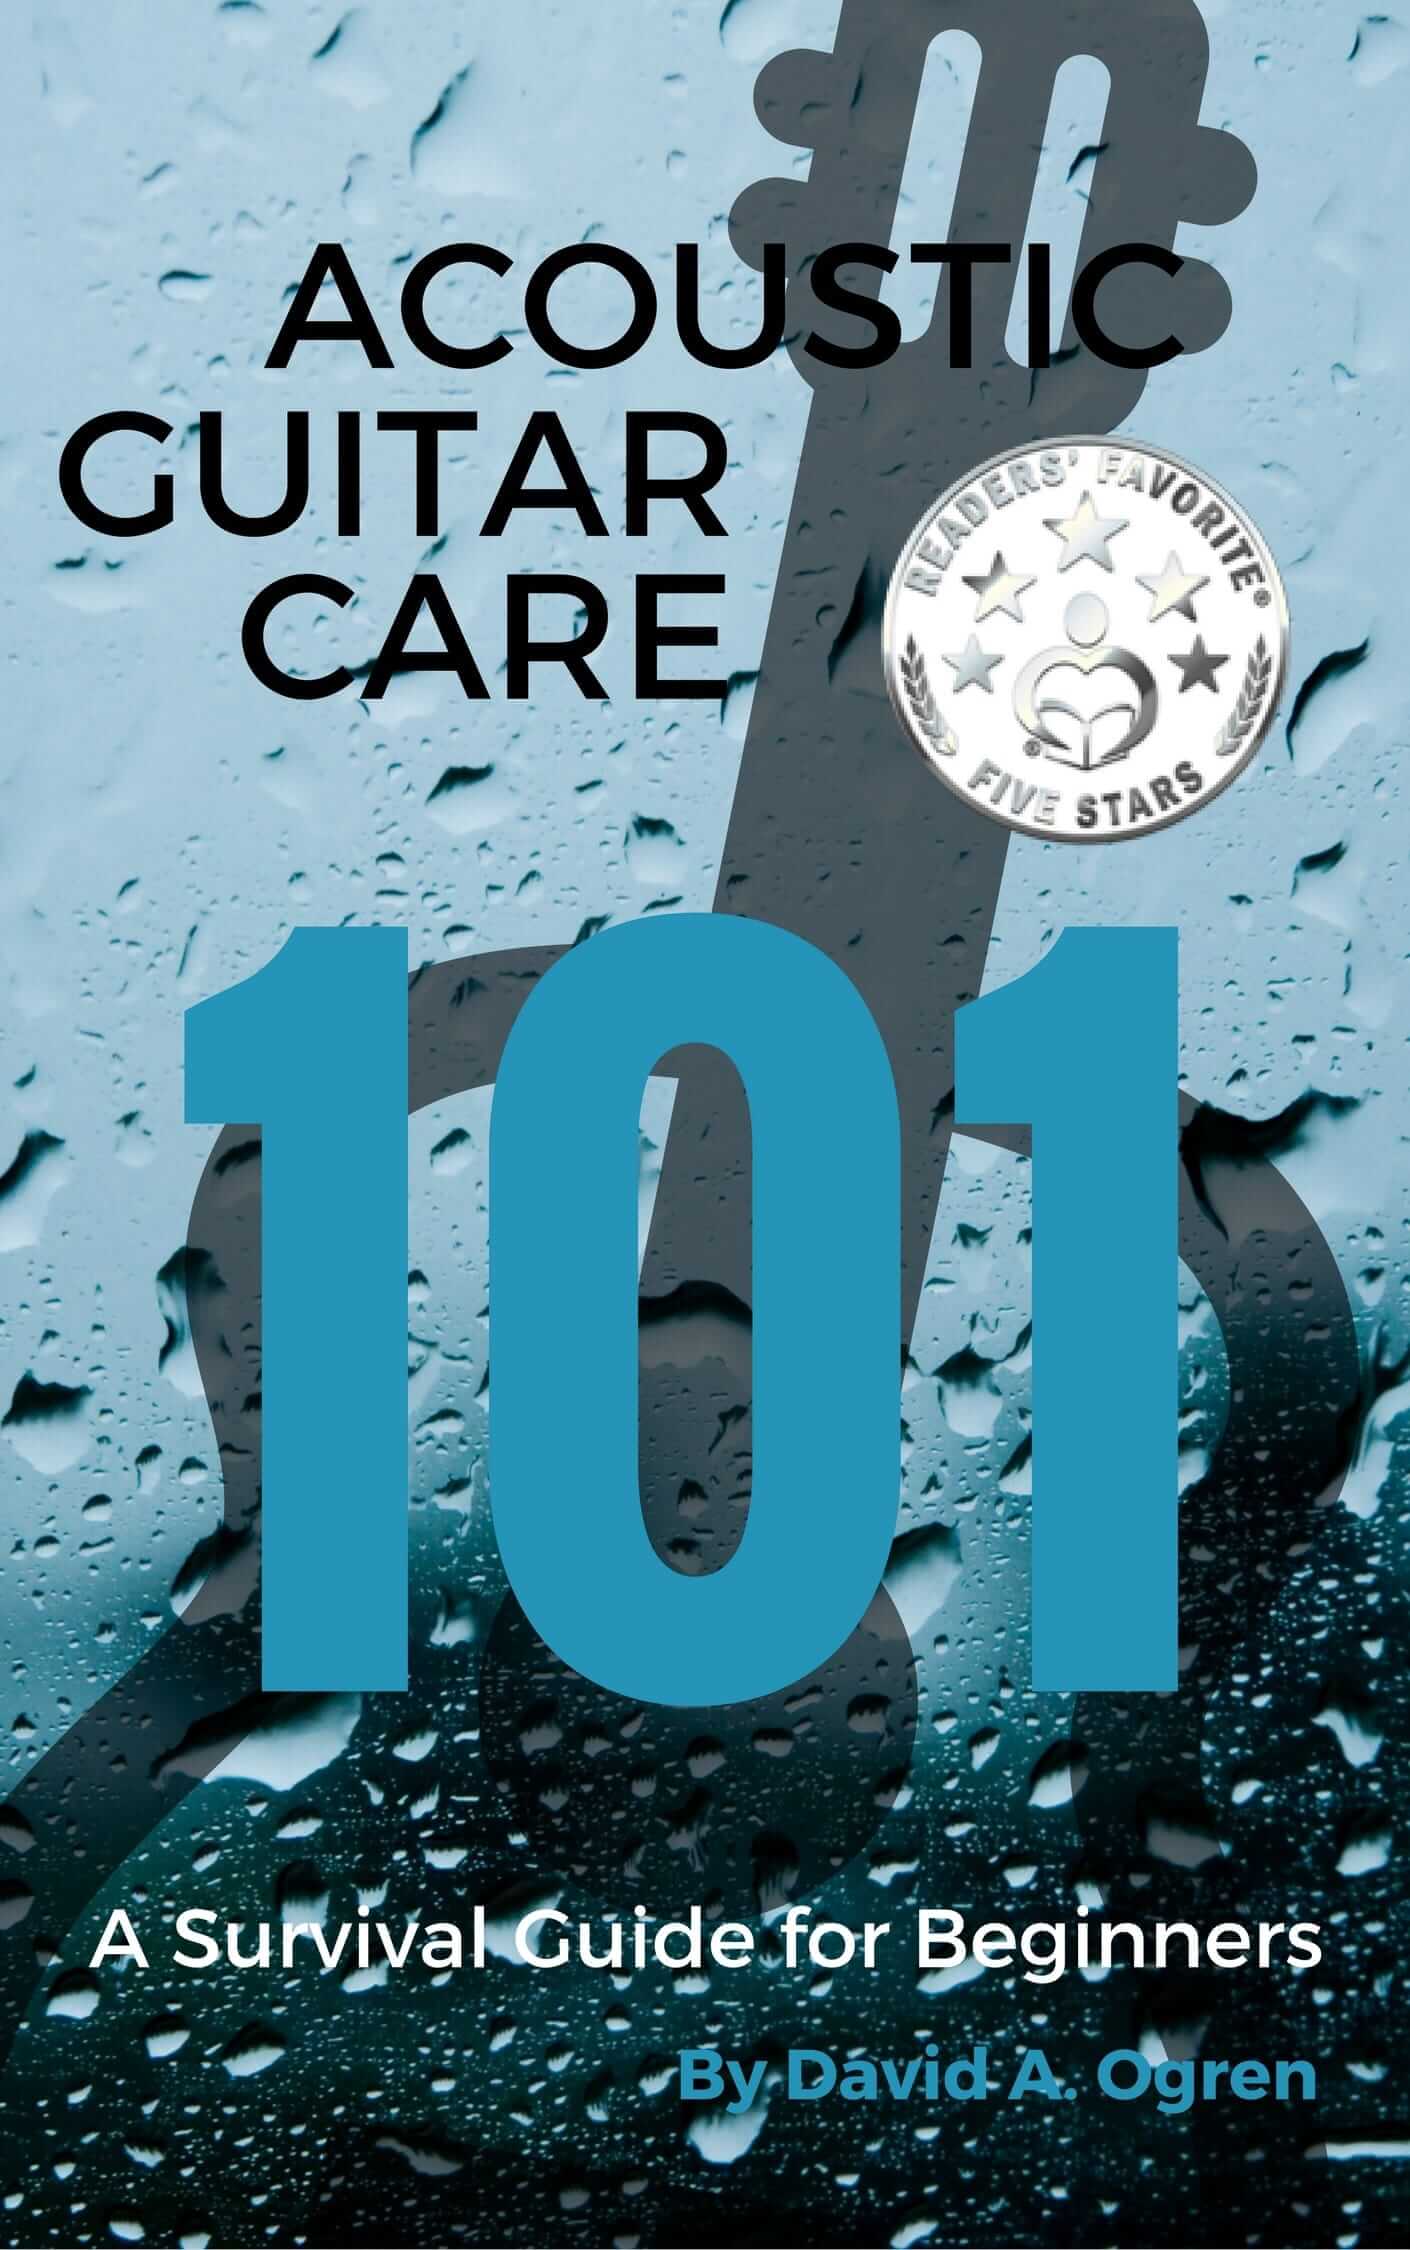 Acoustic Guitar Care 101 - Front Cover Sticker-min-min.jpg